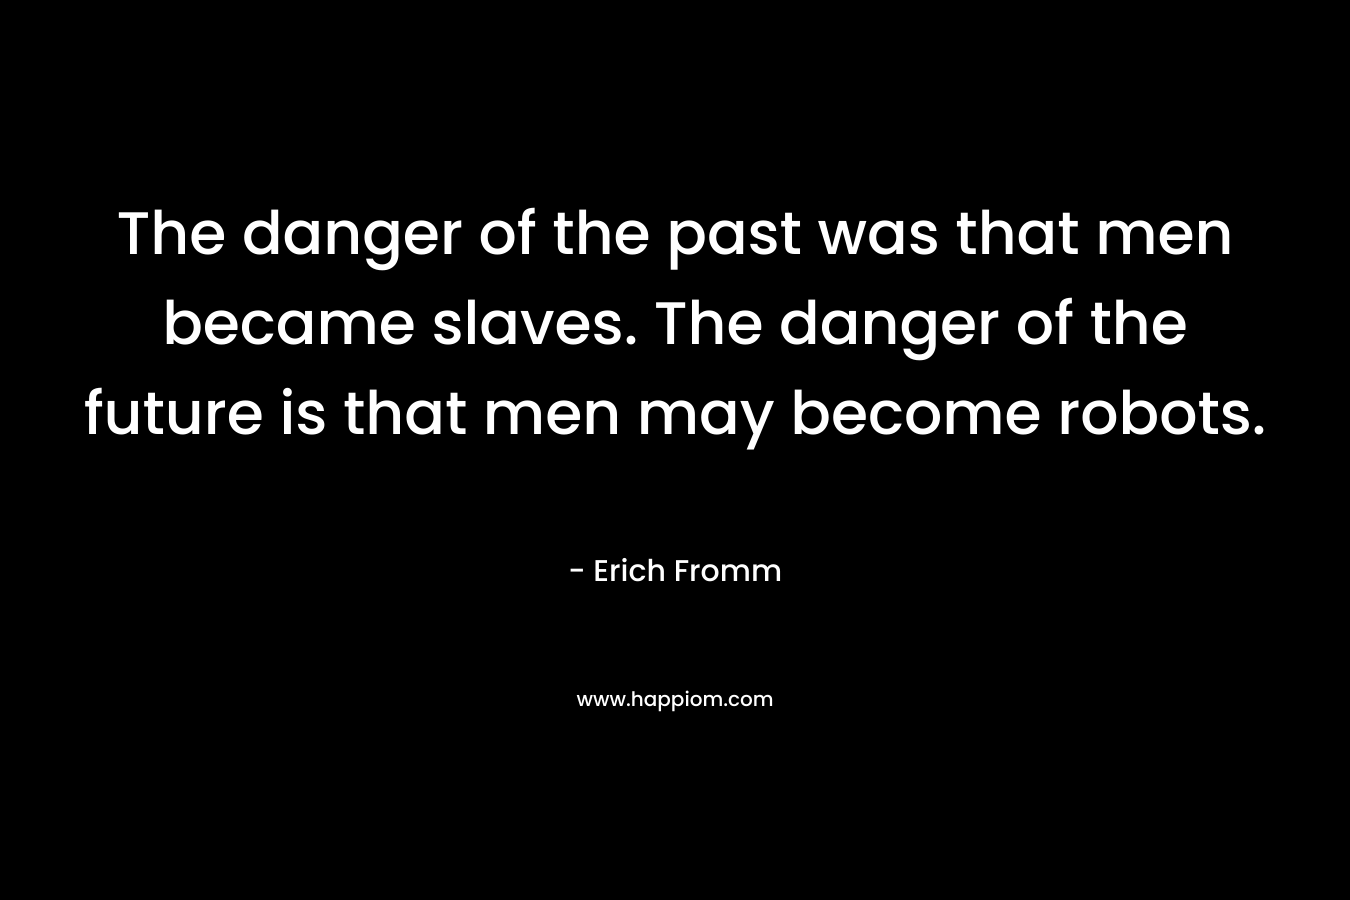 The danger of the past was that men became slaves. The danger of the future is that men may become robots.